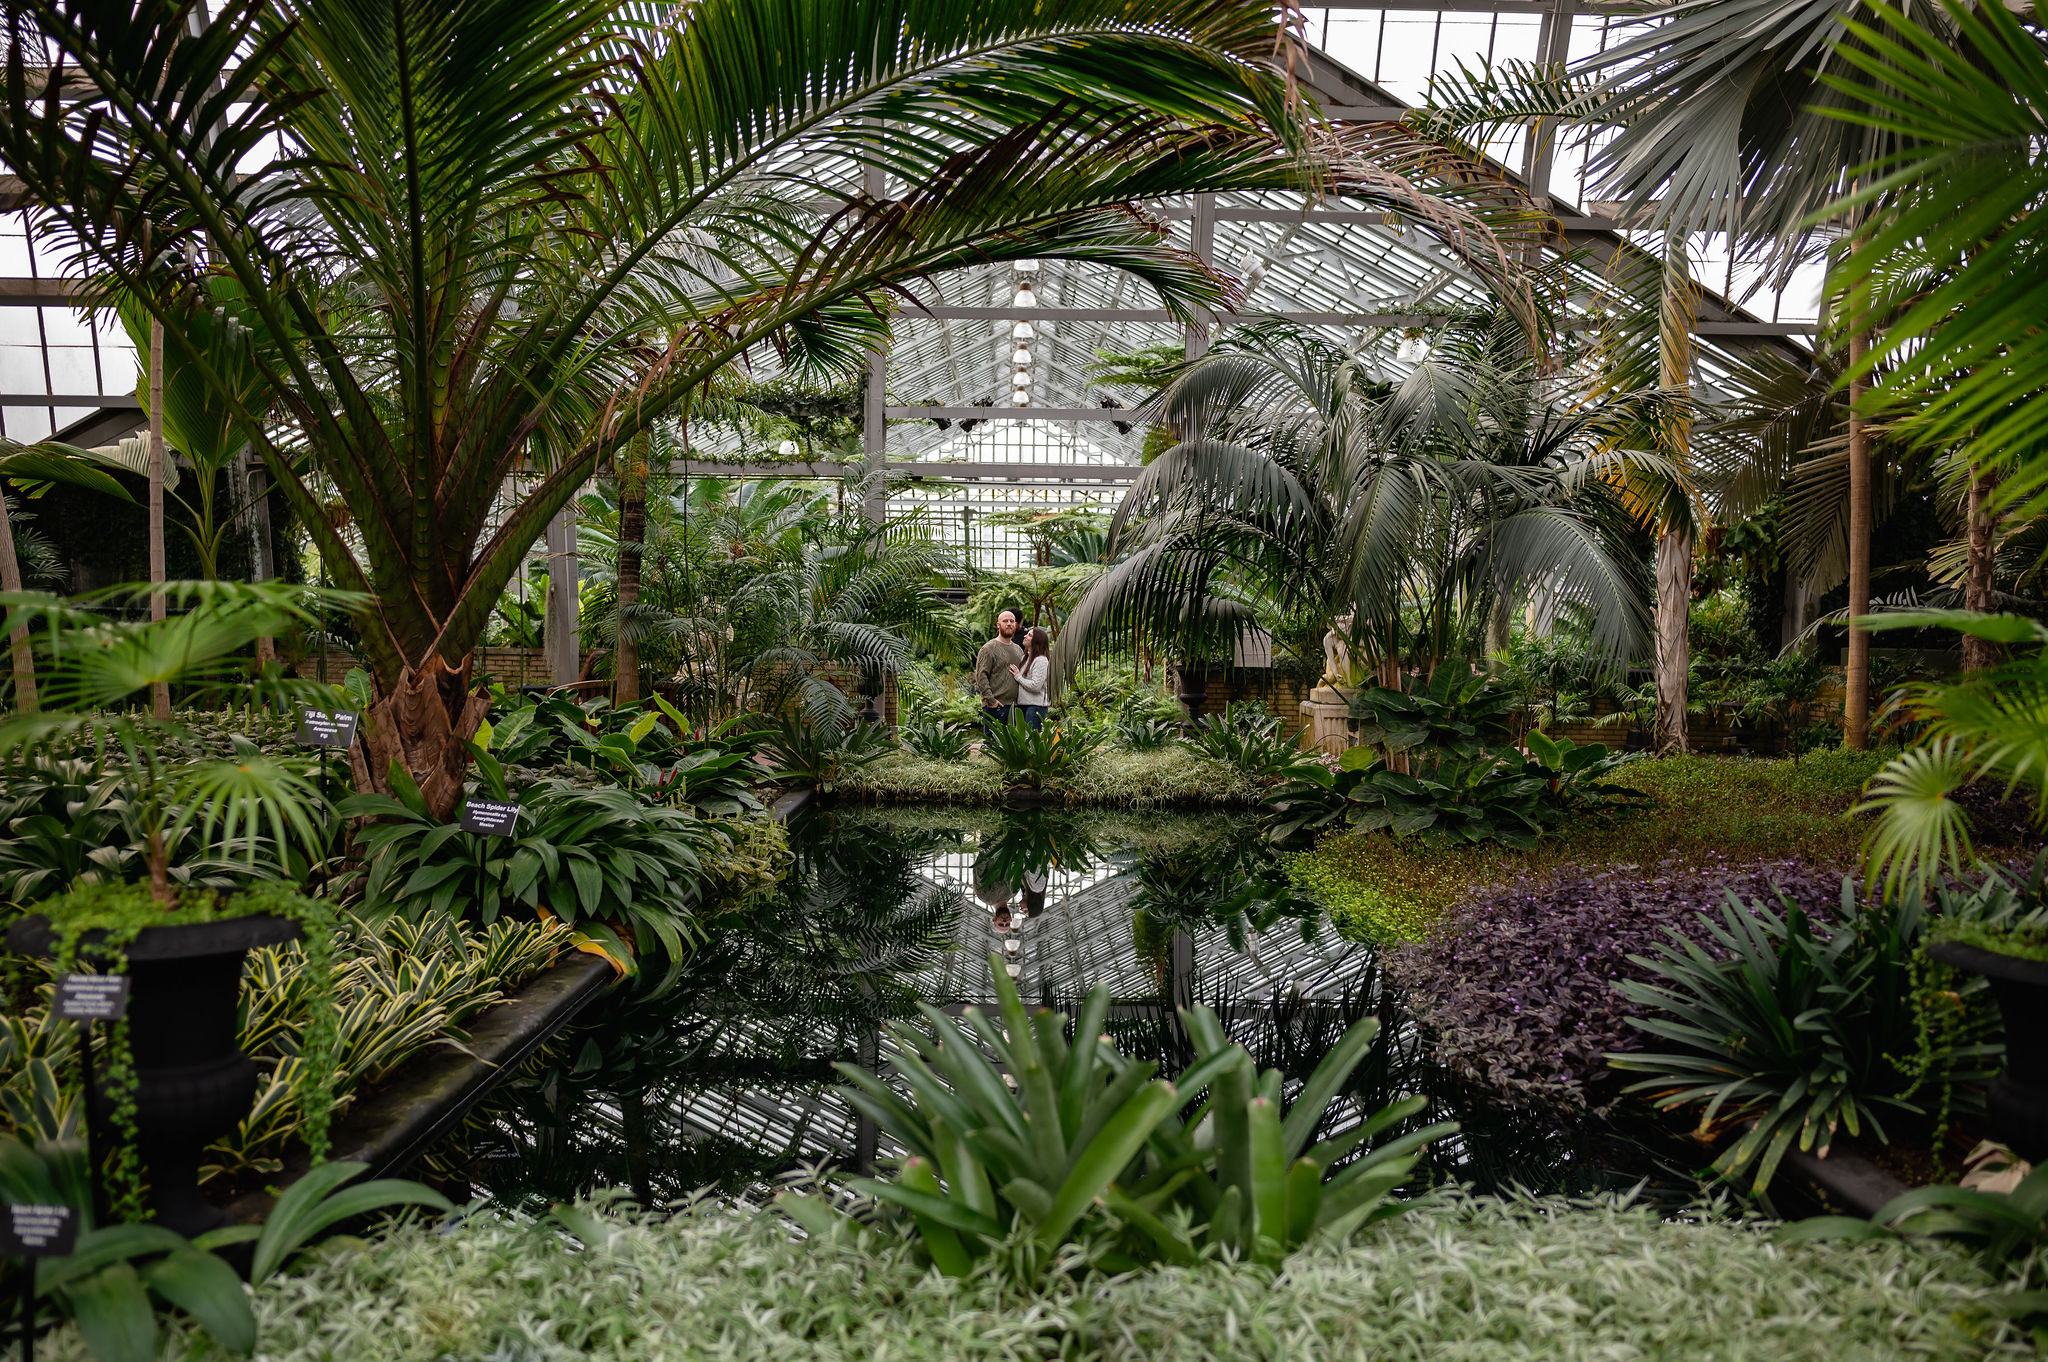 Couple is reflected in water at Garfield Park Conservatory